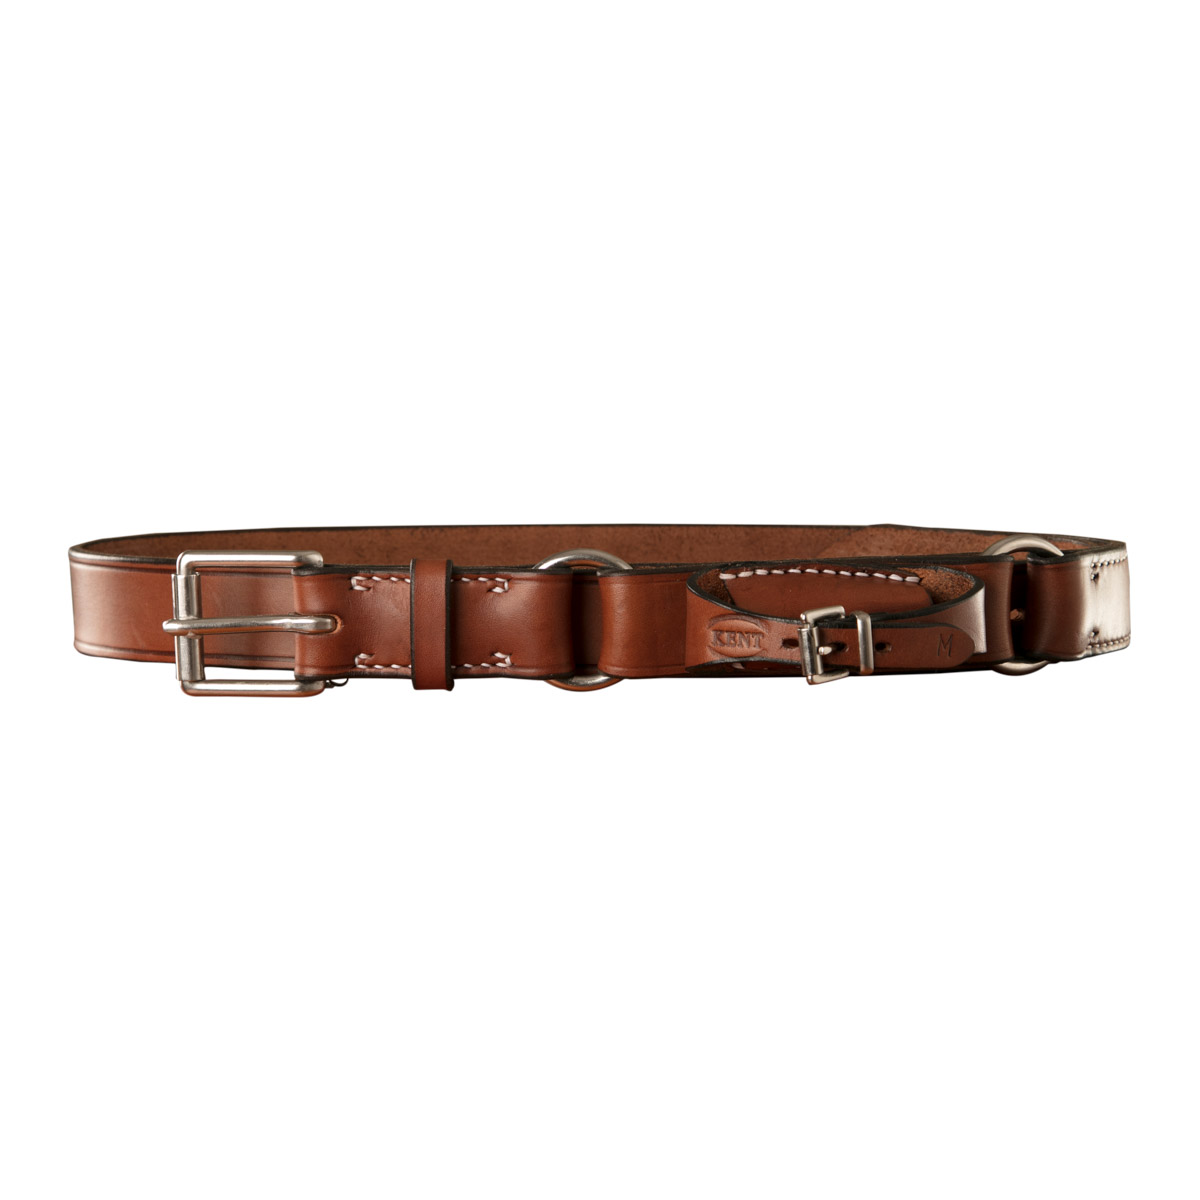 Stockmans Hobble Style Belt, Solid Leather, with Stainless Steel Roller Buckle, 2 Rings and Pouch for Pocket Knife 1